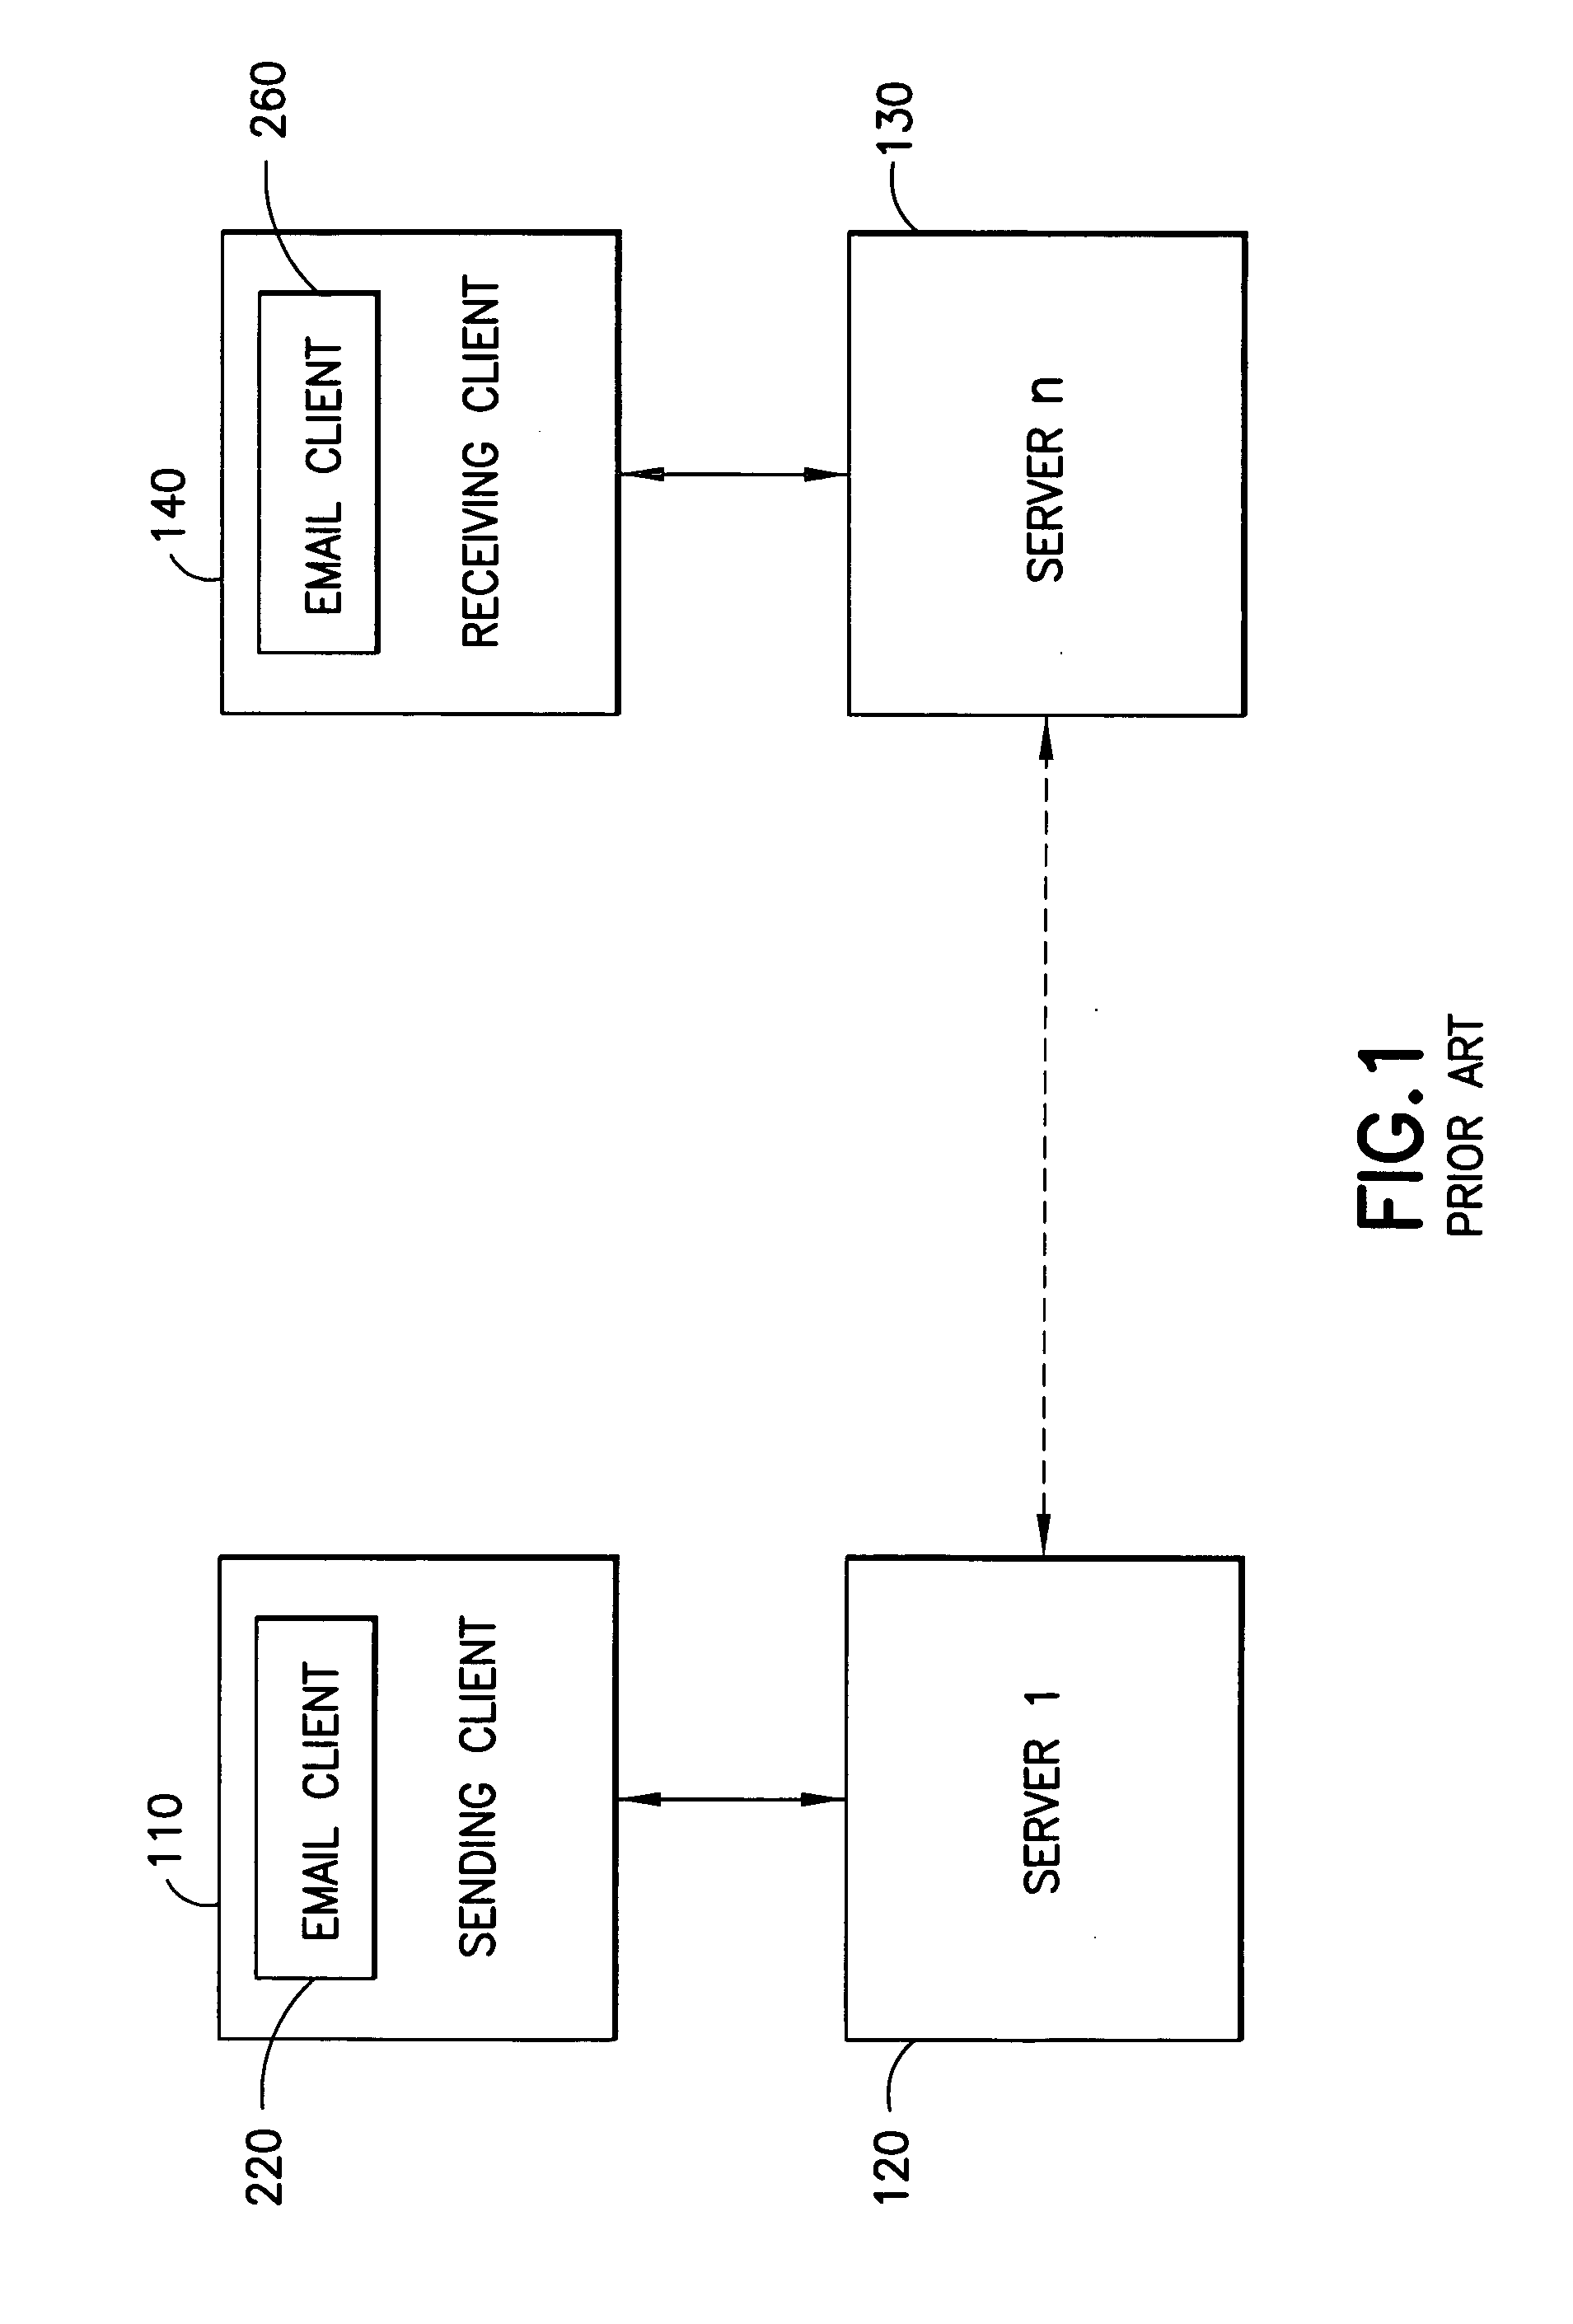 Method and apparatus for utilizing portable e-mail addresses